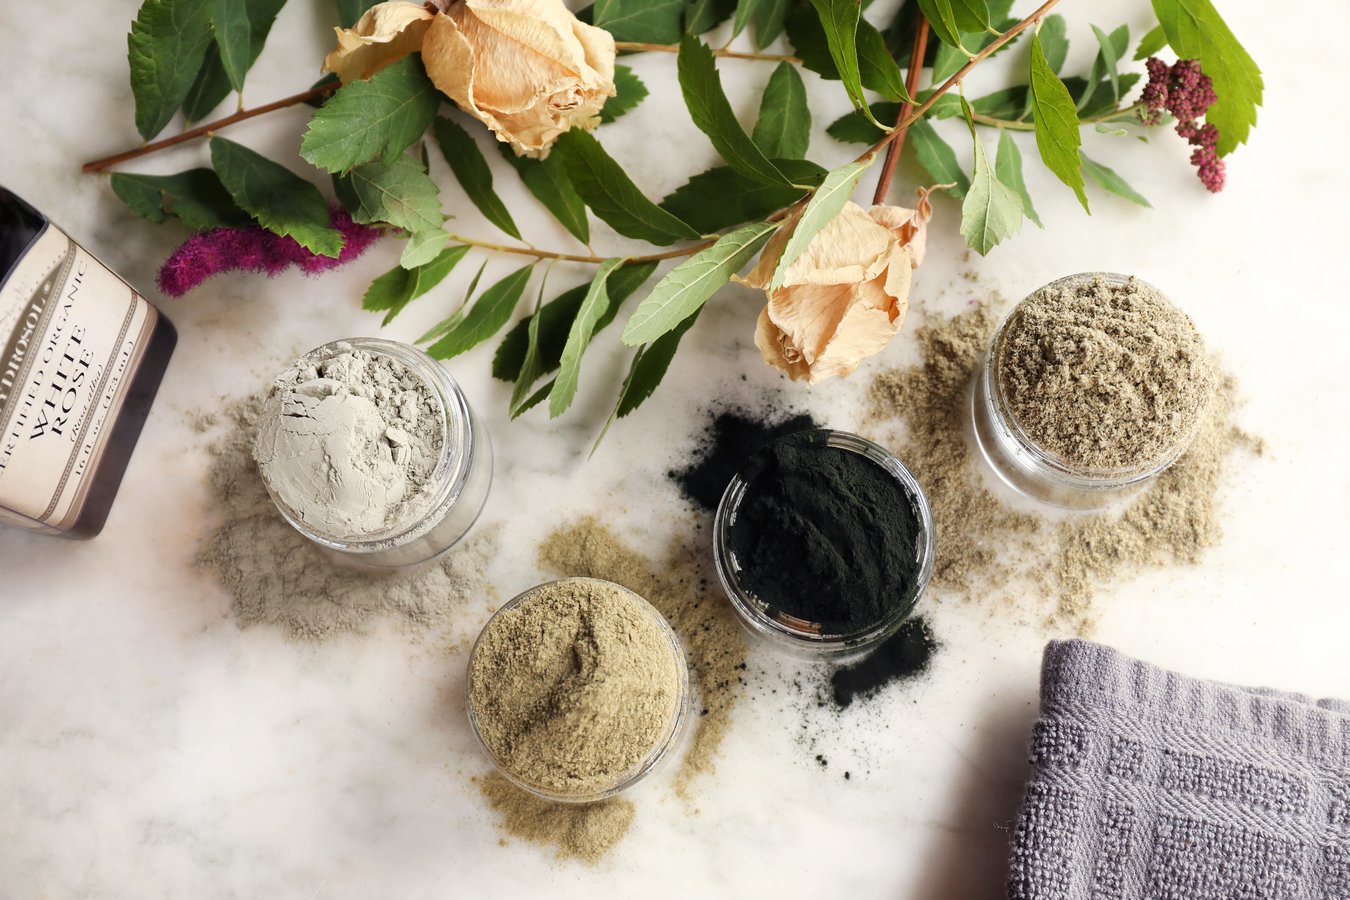 A variety of clay, spirulina, and seaweed powders in jars  for dry face mask recipe, set among roses and bay branches, with Mountain Rose Herbs bottle of rose hydrosol to add liquid to mask base.